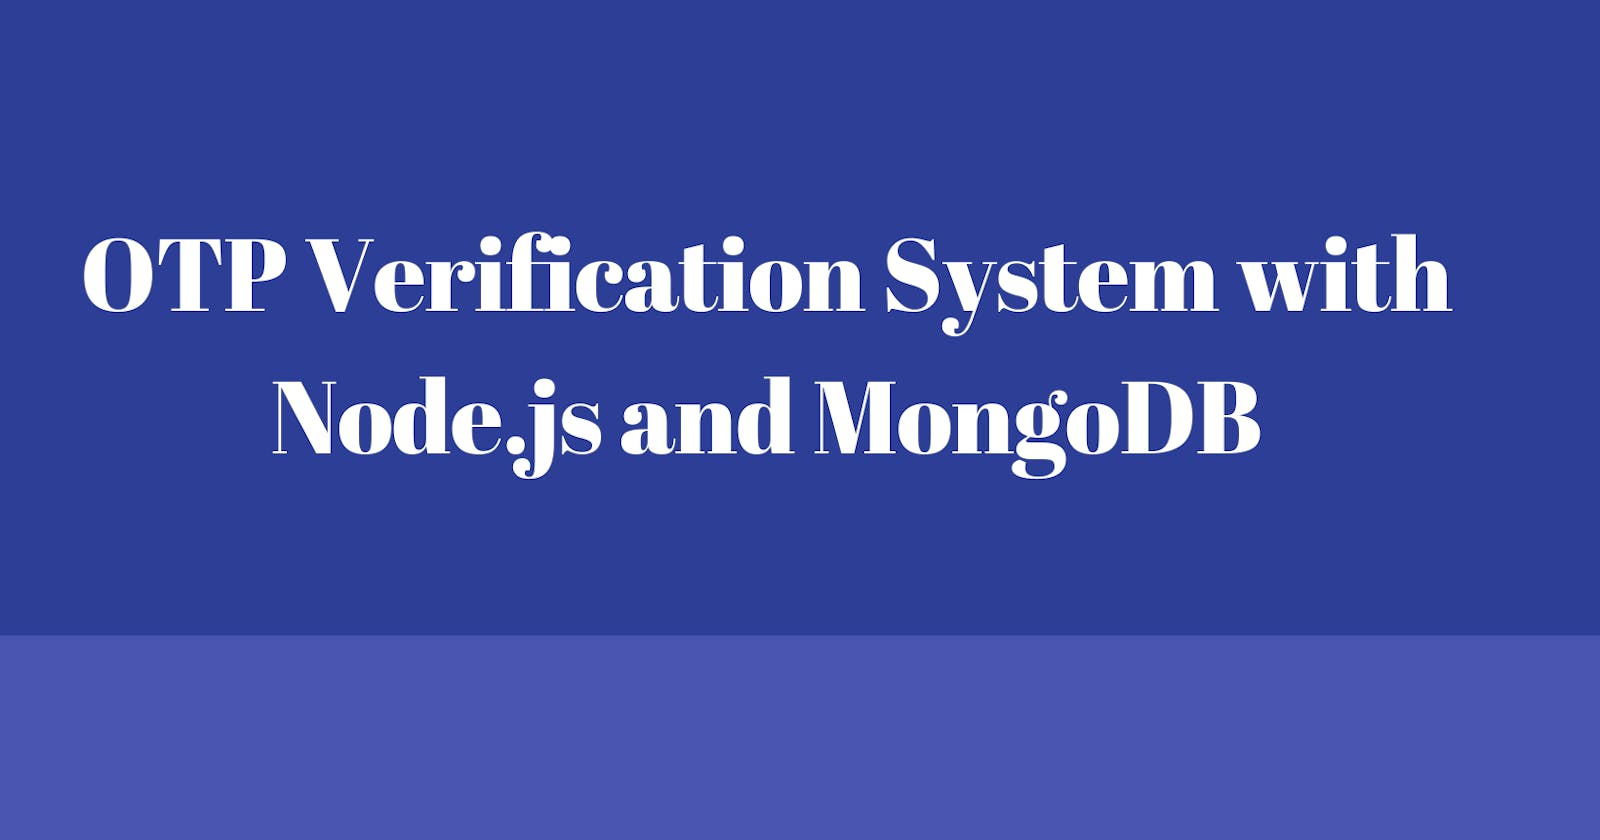 Implementing OTP Verification in Node.js with MongoDB: A Step-by-Step Guide for Secure Authentication